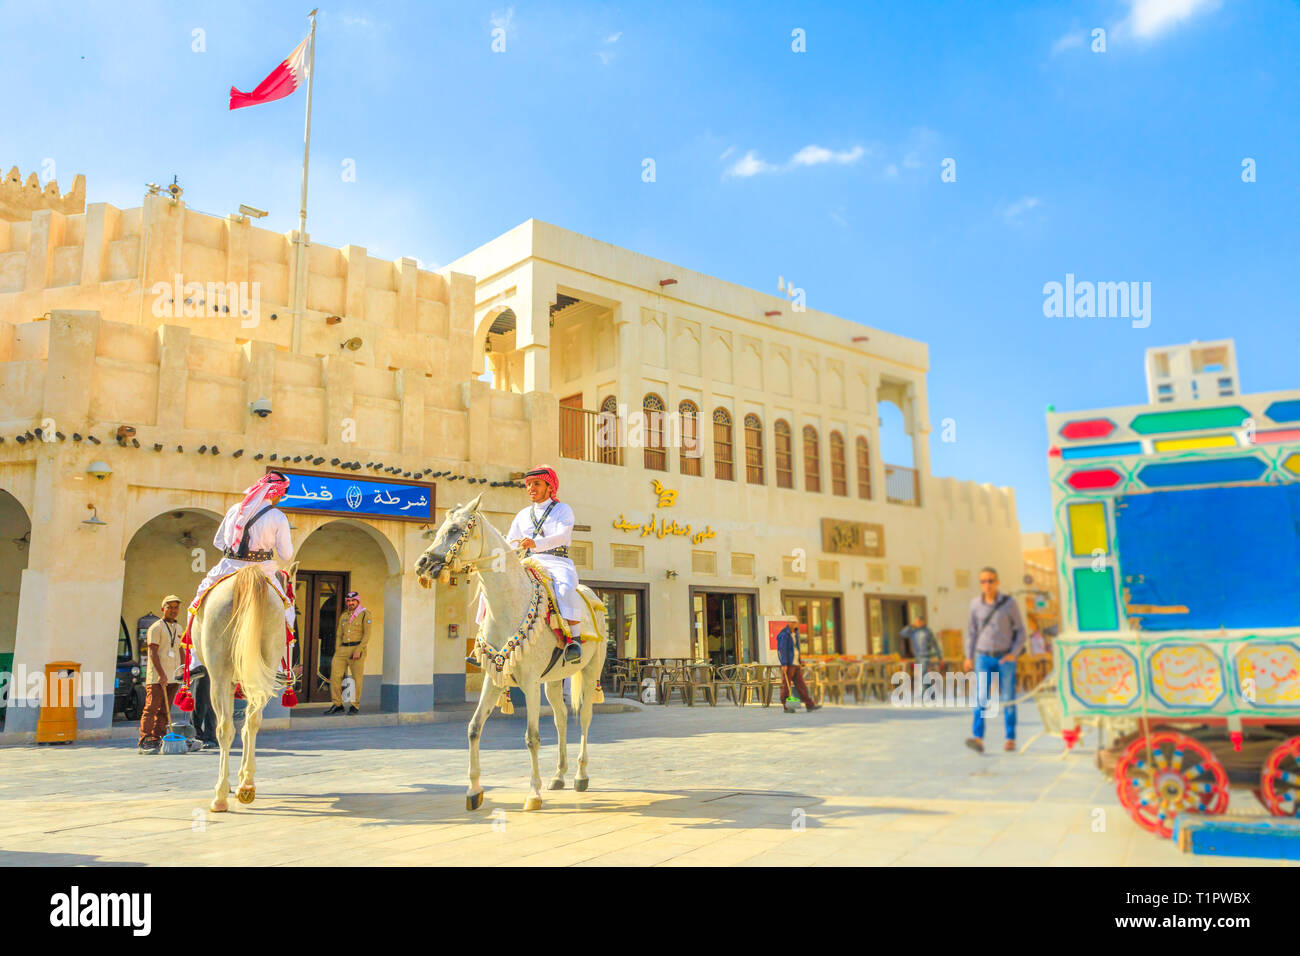 Doha, Qatar - February 20, 2019: Police on horse at Souq Waqif riding white Arabian Horses. Popular tourist attraction in Middle East, Arabian Stock Photo